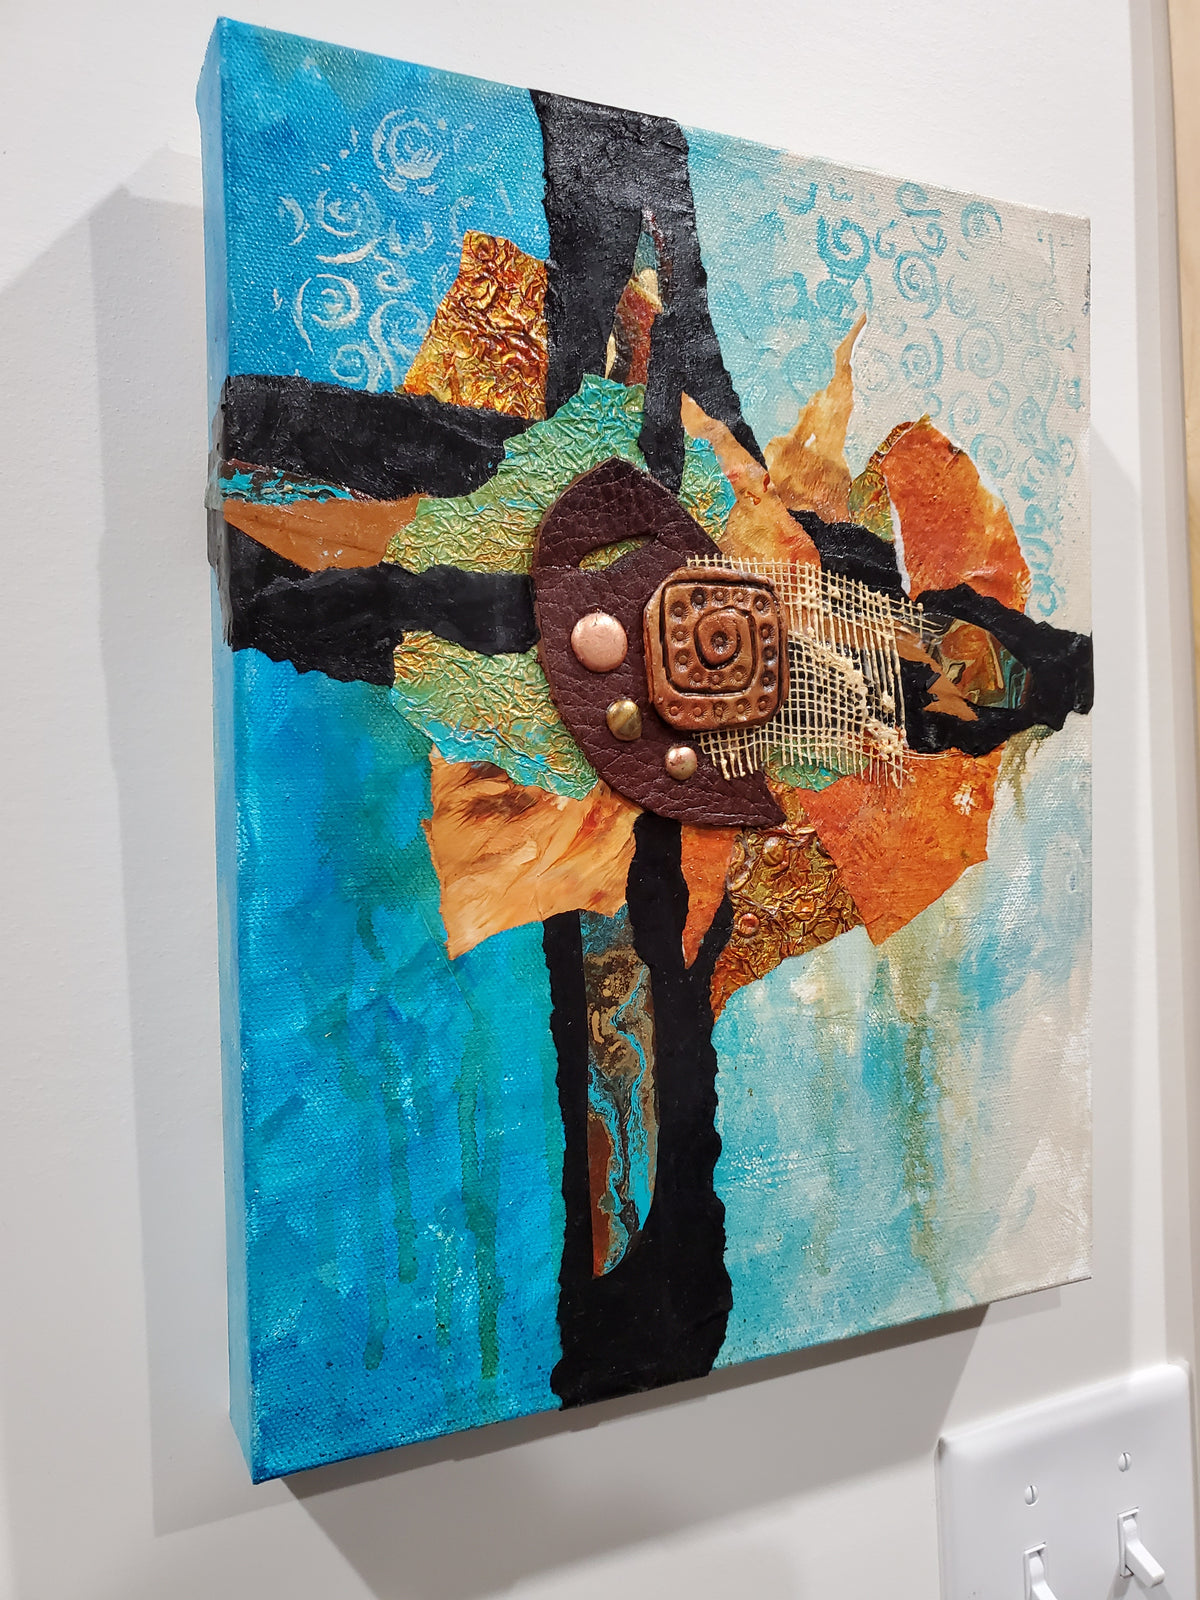 "Heart of Te Fiti" by Selena Doolittle McColley - Mixed Media Collage